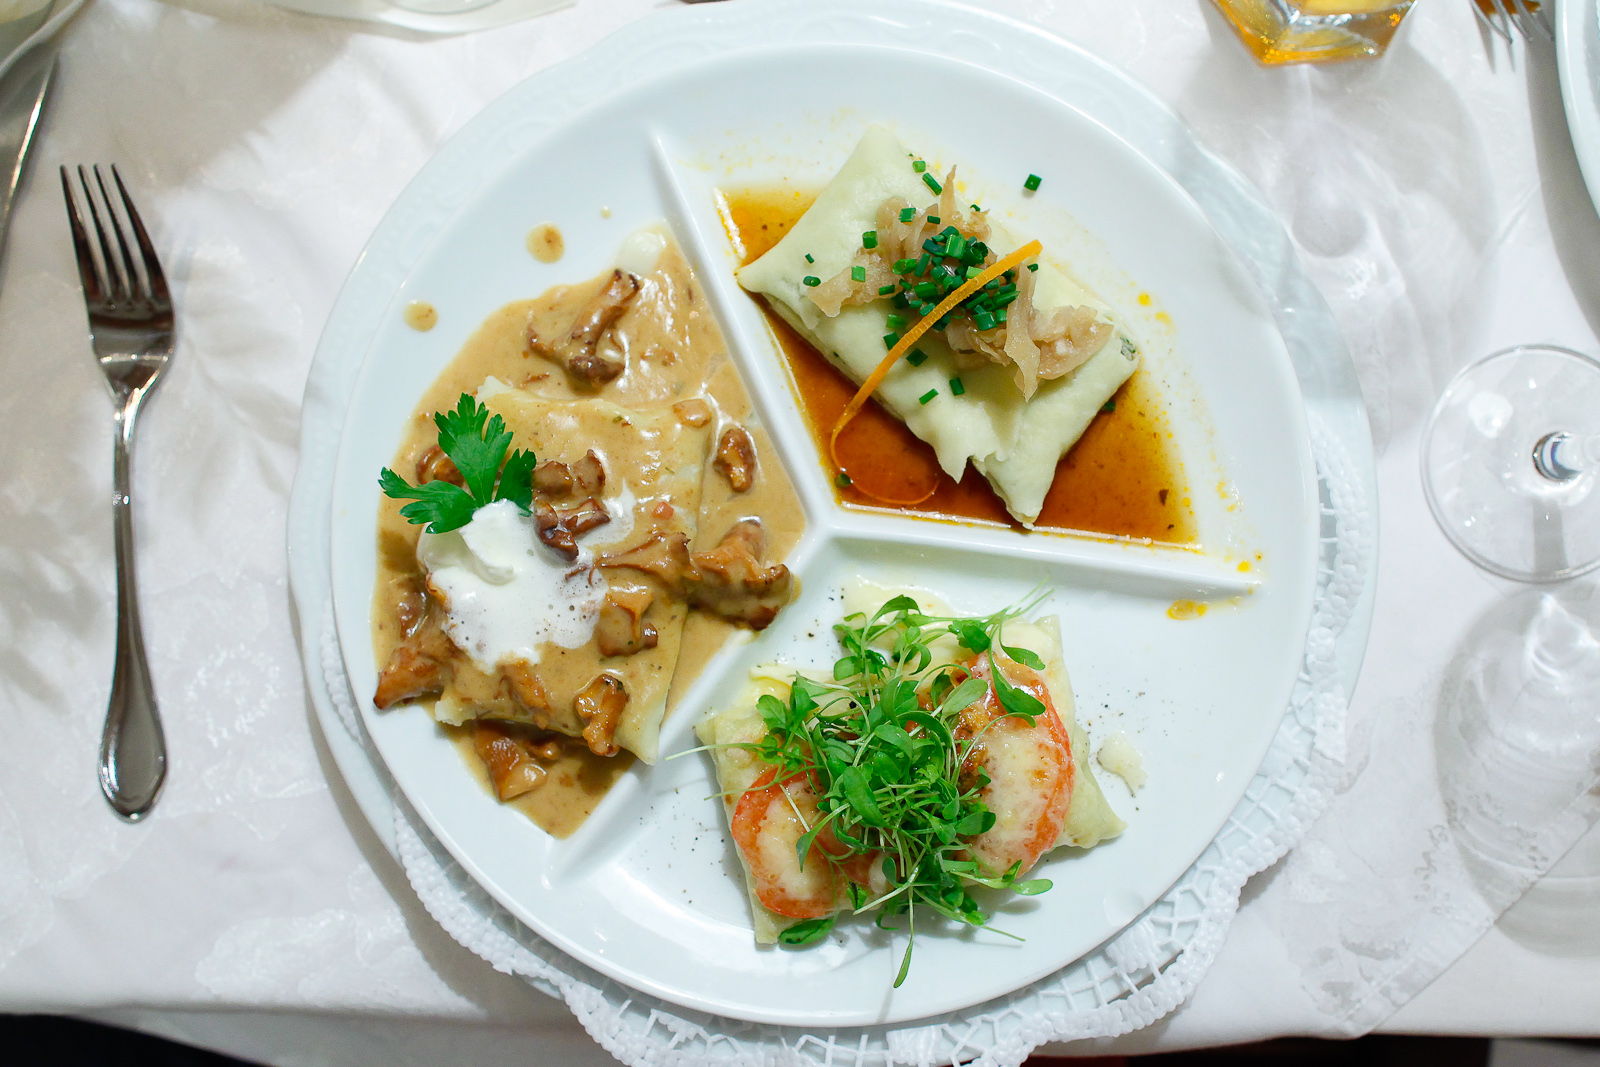 3rd Course: Variation of maultaschen, filled pasta squares